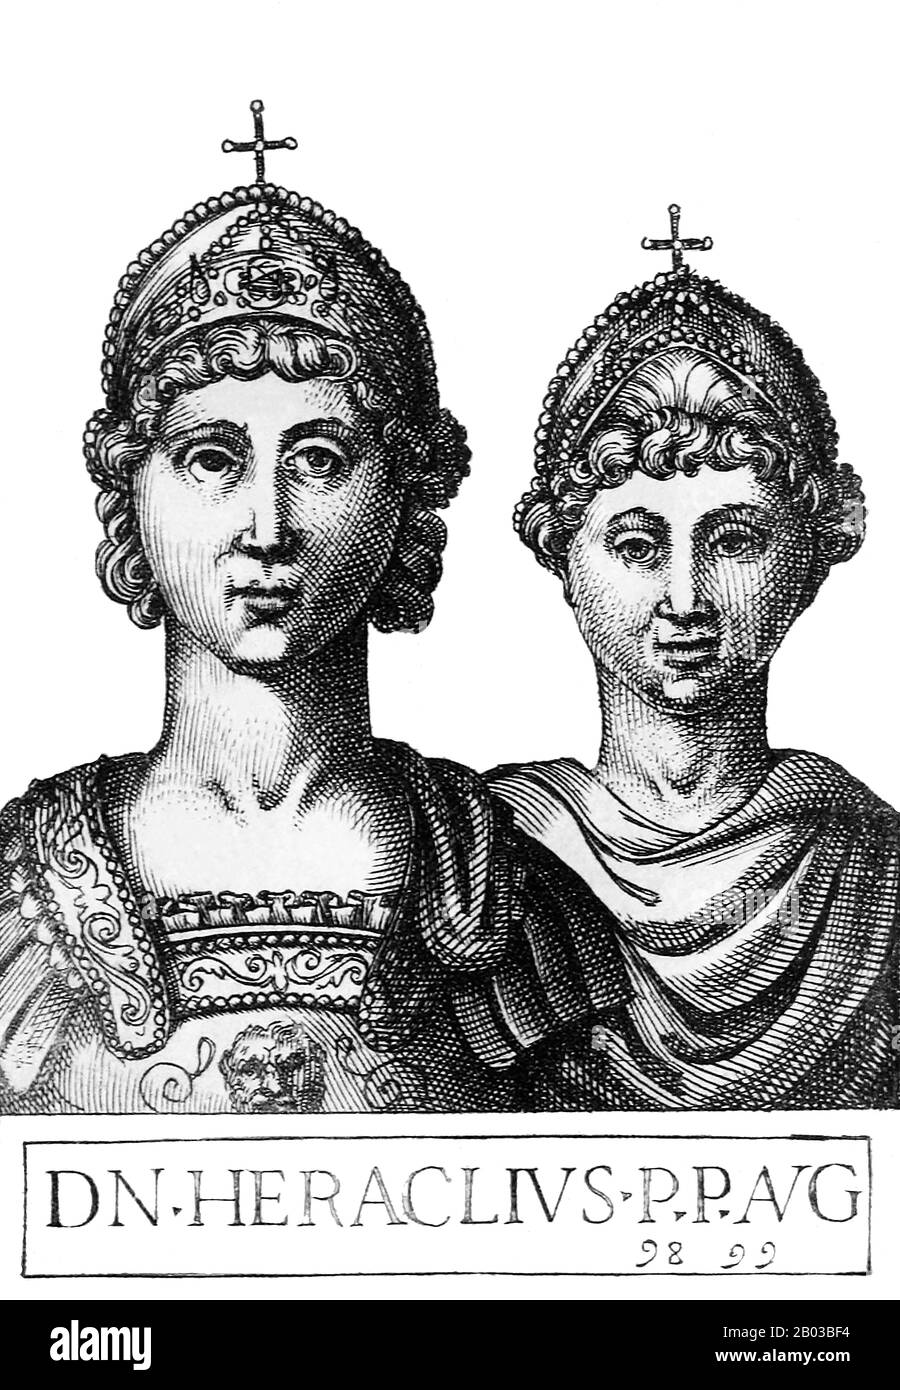 Constantine III (612-641), birth name Heraclius Novus Constantinus, was the eldest son of Emperor Heraclius by his first wife Eudokia. He was named co-emperor in 613. Constantine became senior emperor in 641 after his father's death, and ruled alongside his younger half-brother, Heraklonas (626-641), son of Heraclius' second wife Martina. Heraklonas officially reigned under the name Flavius Constantinus Heraclius. Stock Photo